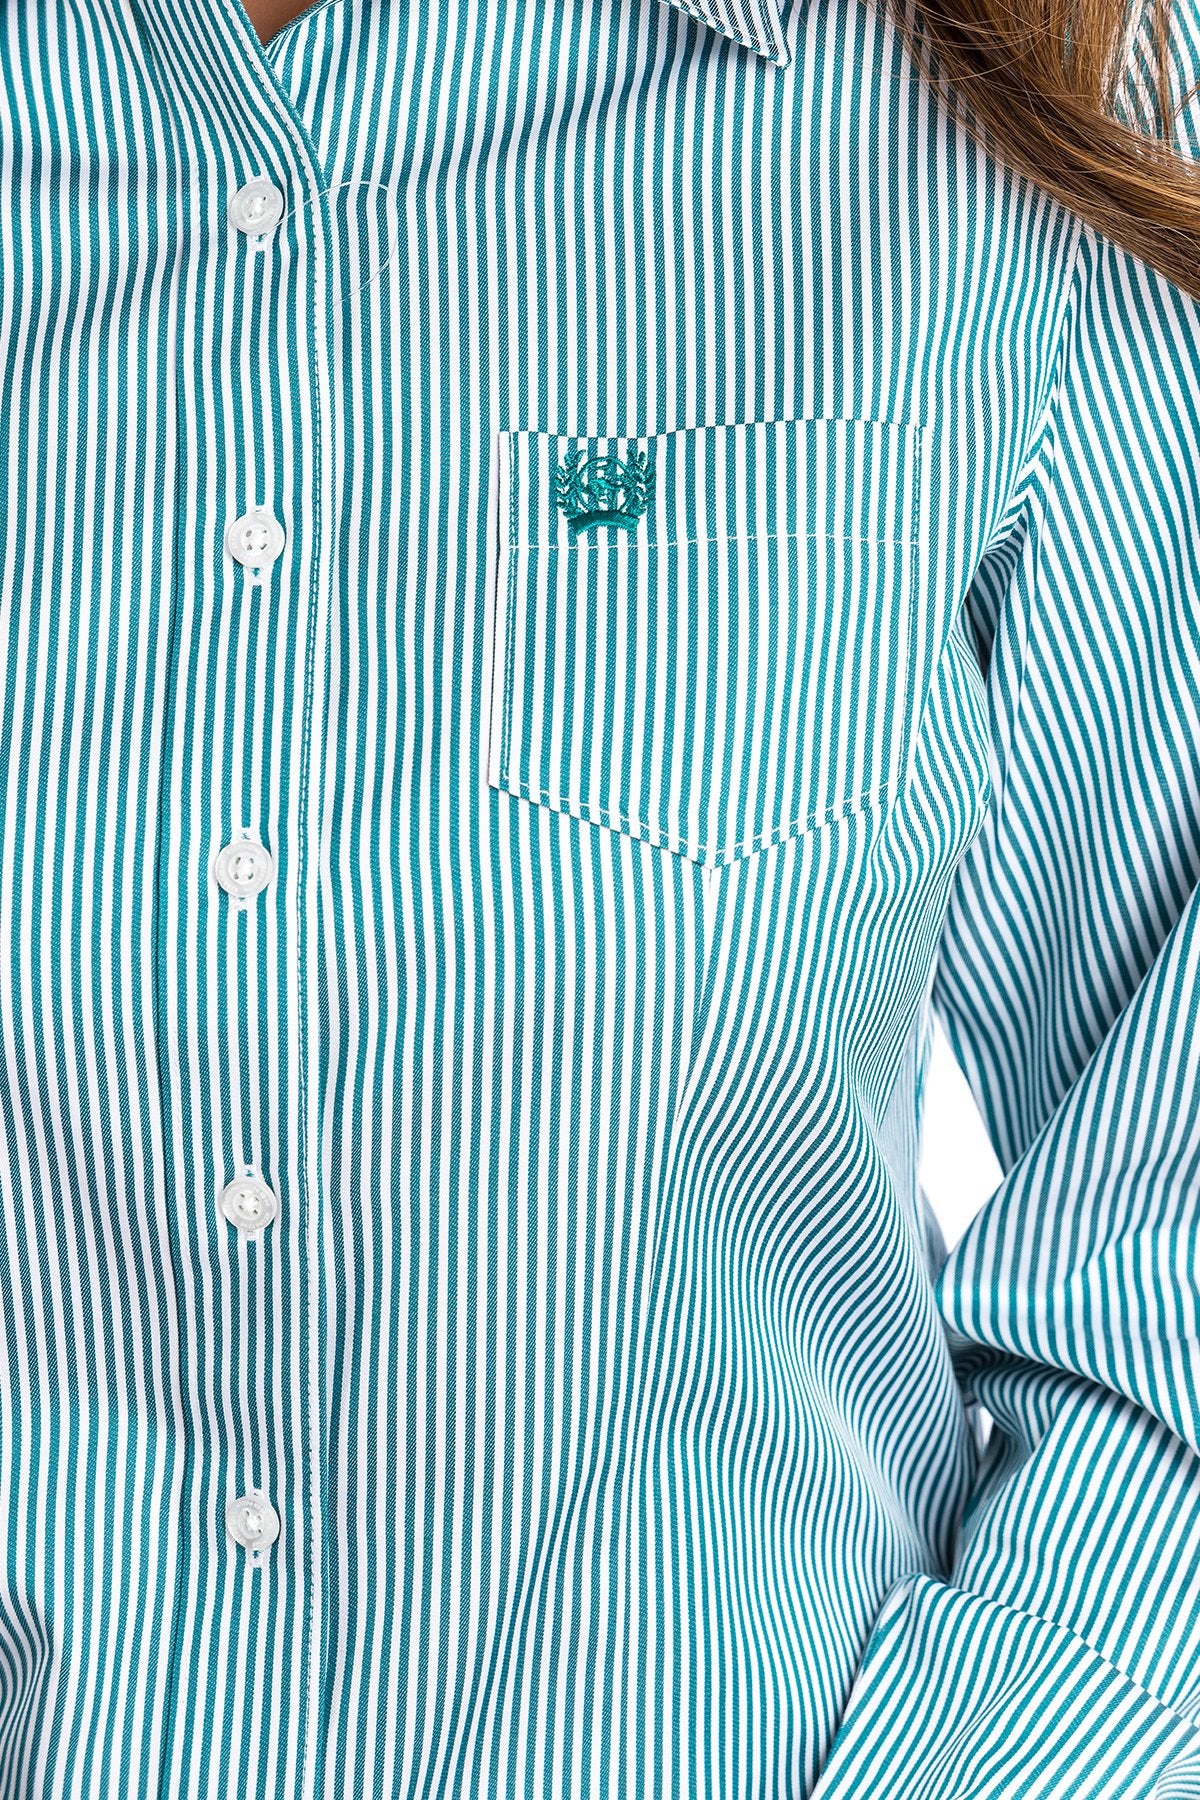 WOMEN'S TENCEL™ TEAL AND WHITE STRIPE BUTTON-UP SHIRT